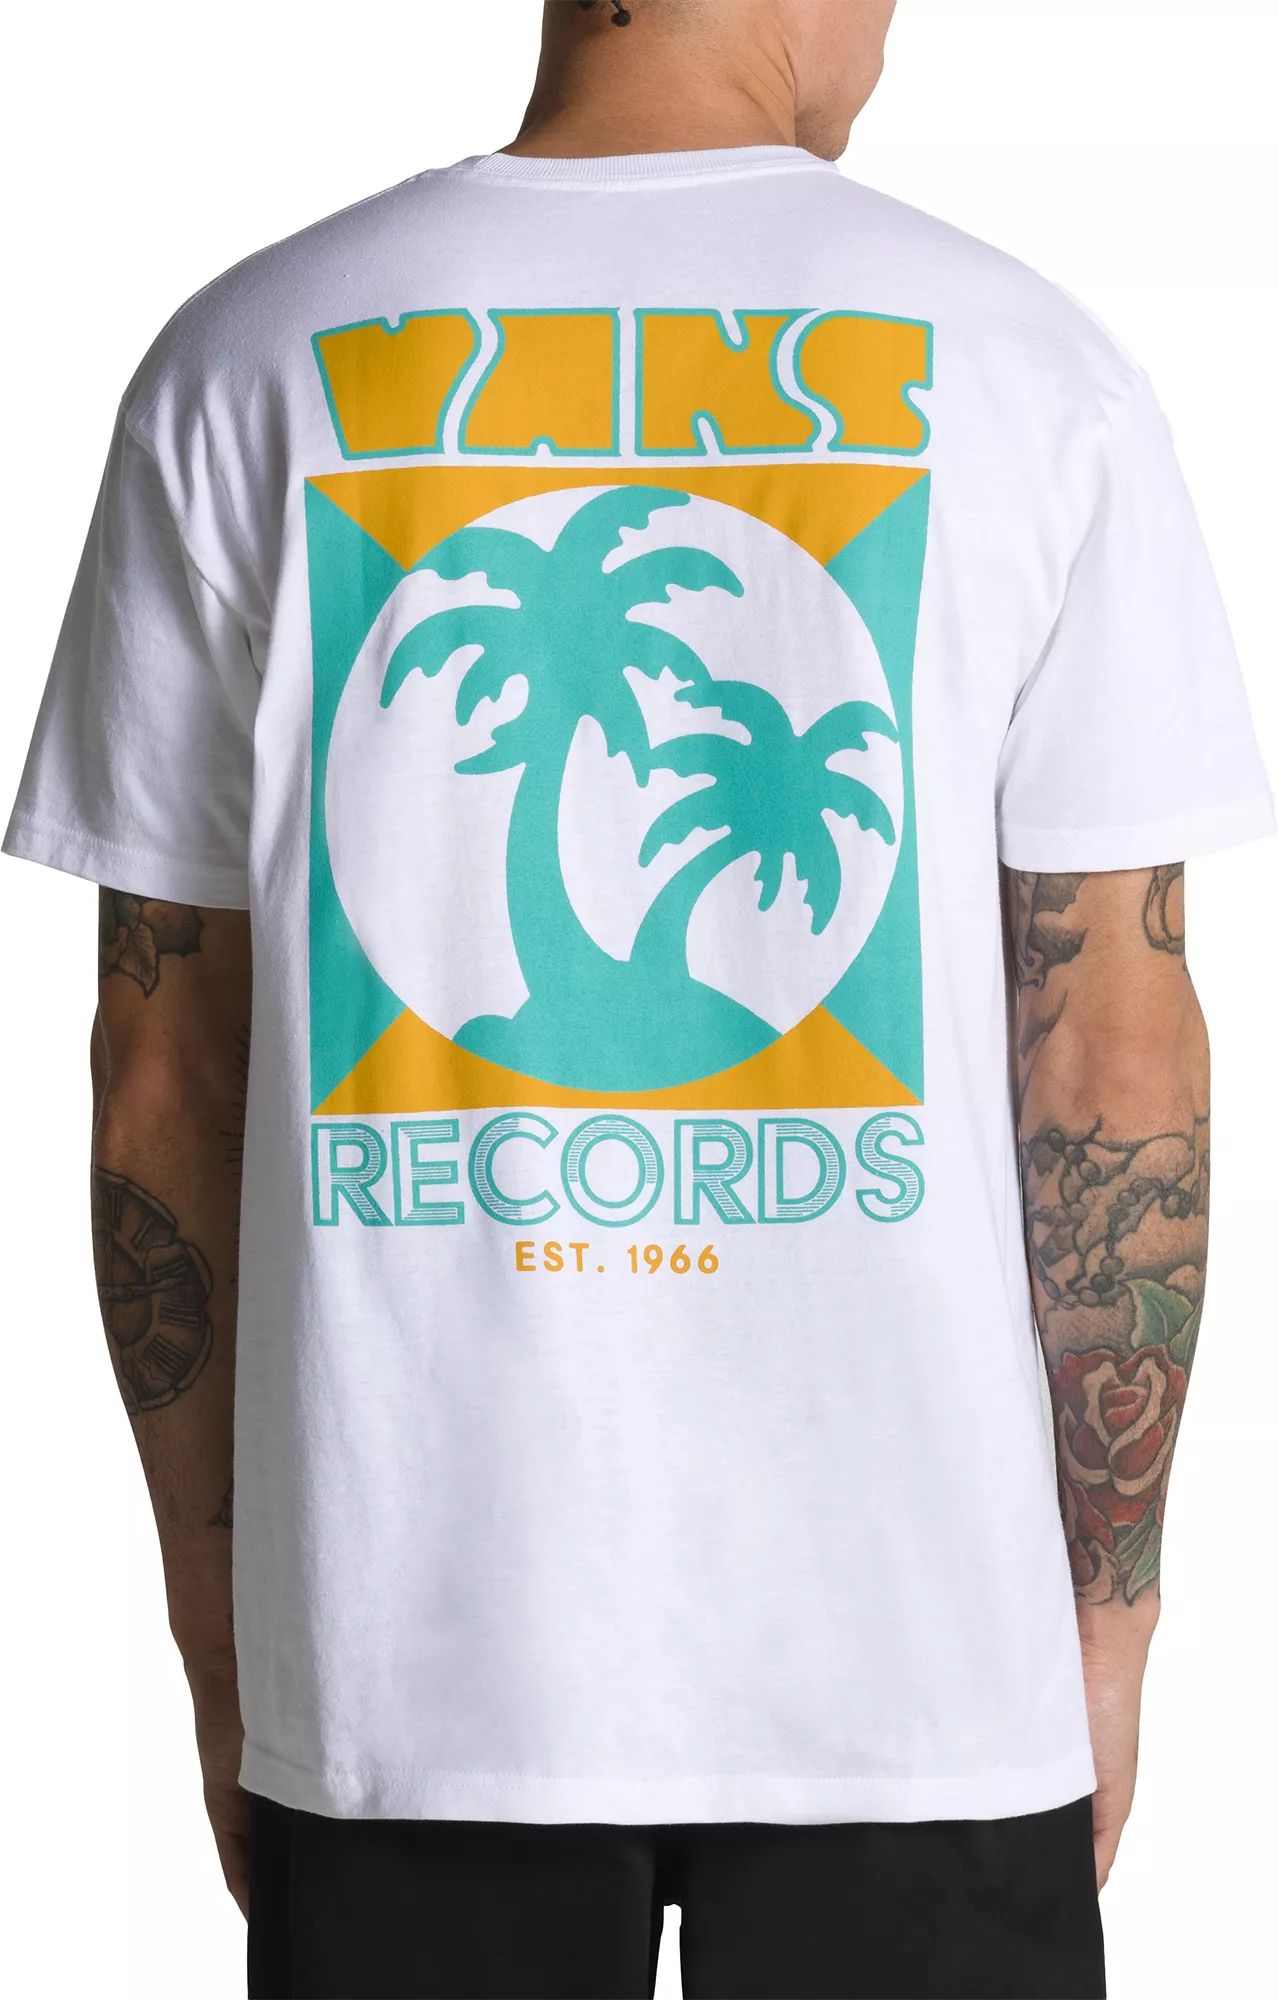 Vans Men's Records Graphic T-Shirt, Large, White | Dick's Sporting Goods